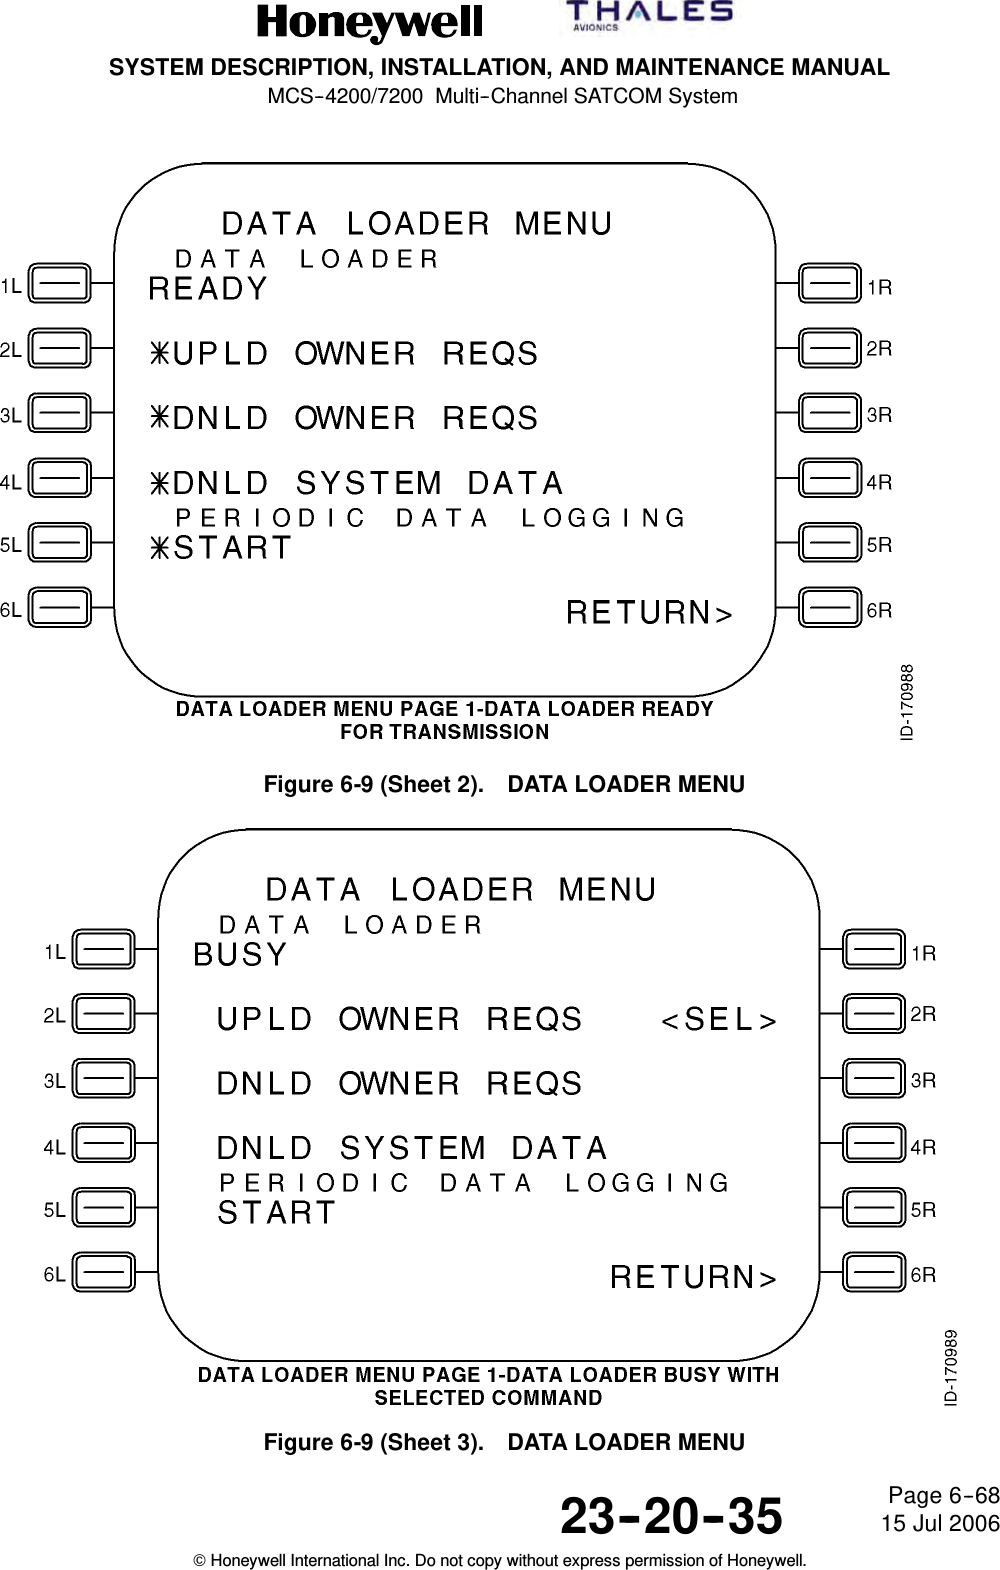 SYSTEM DESCRIPTION, INSTALLATION, AND MAINTENANCE MANUALMCS--4200/7200 Multi--Channel SATCOM System23--20--35 15 Jul 2006Honeywell International Inc. Do not copy without express permission of Honeywell.Page 6--68Figure 6-9 (Sheet 2). DATA LOADER MENUFigure 6-9 (Sheet 3). DATA LOADER MENU